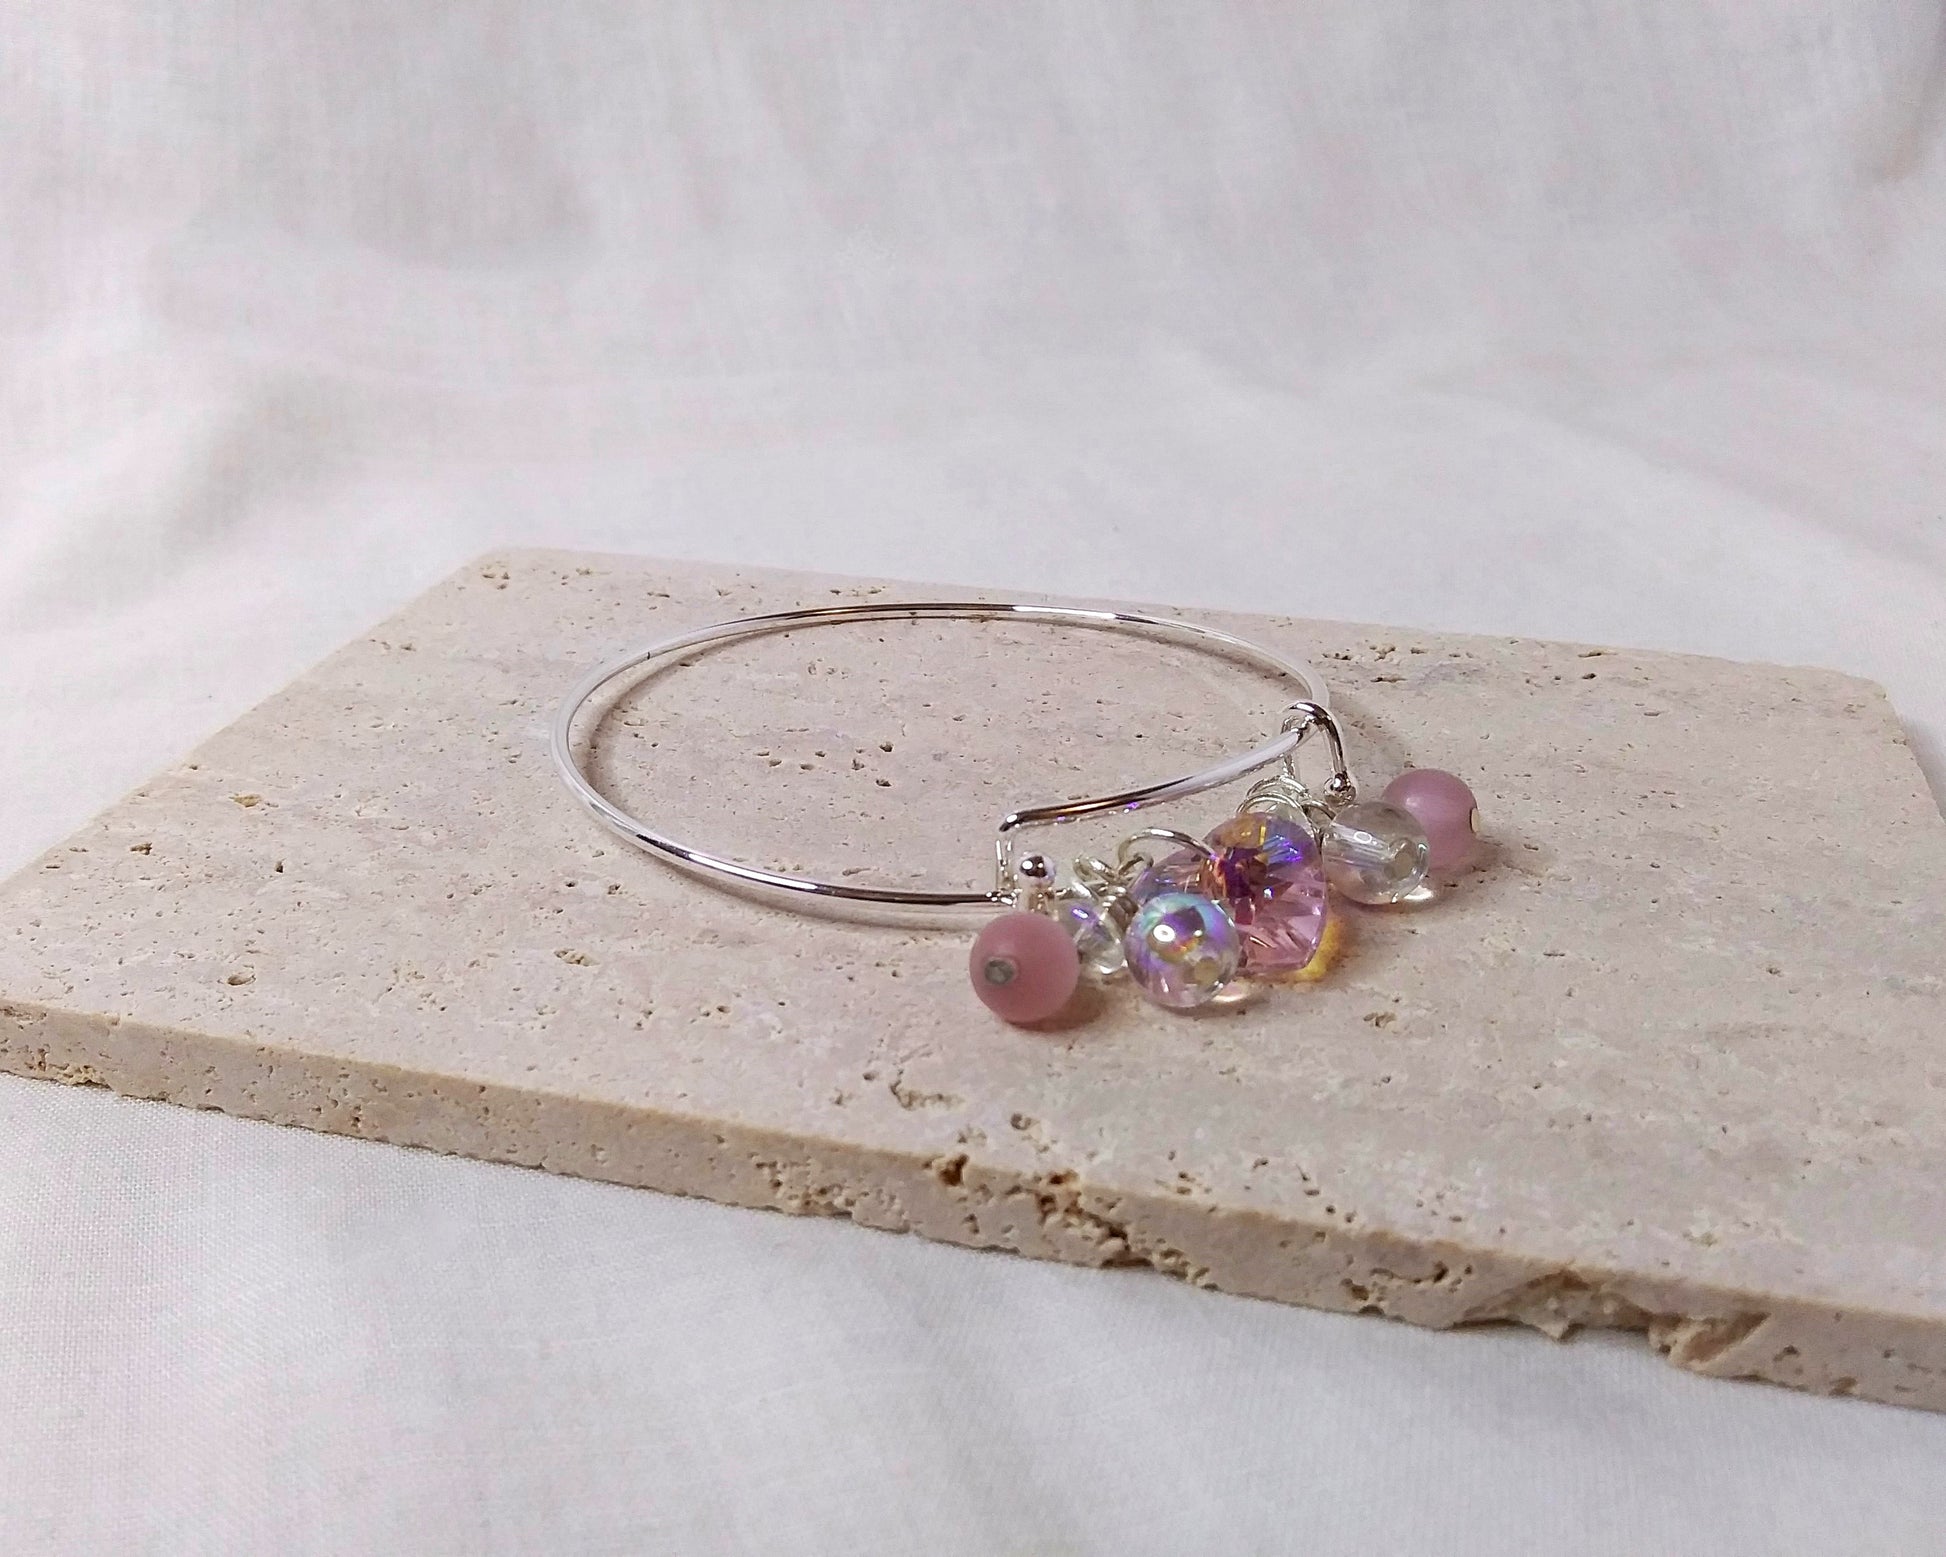 Pink and silver beaded bangle bracelet